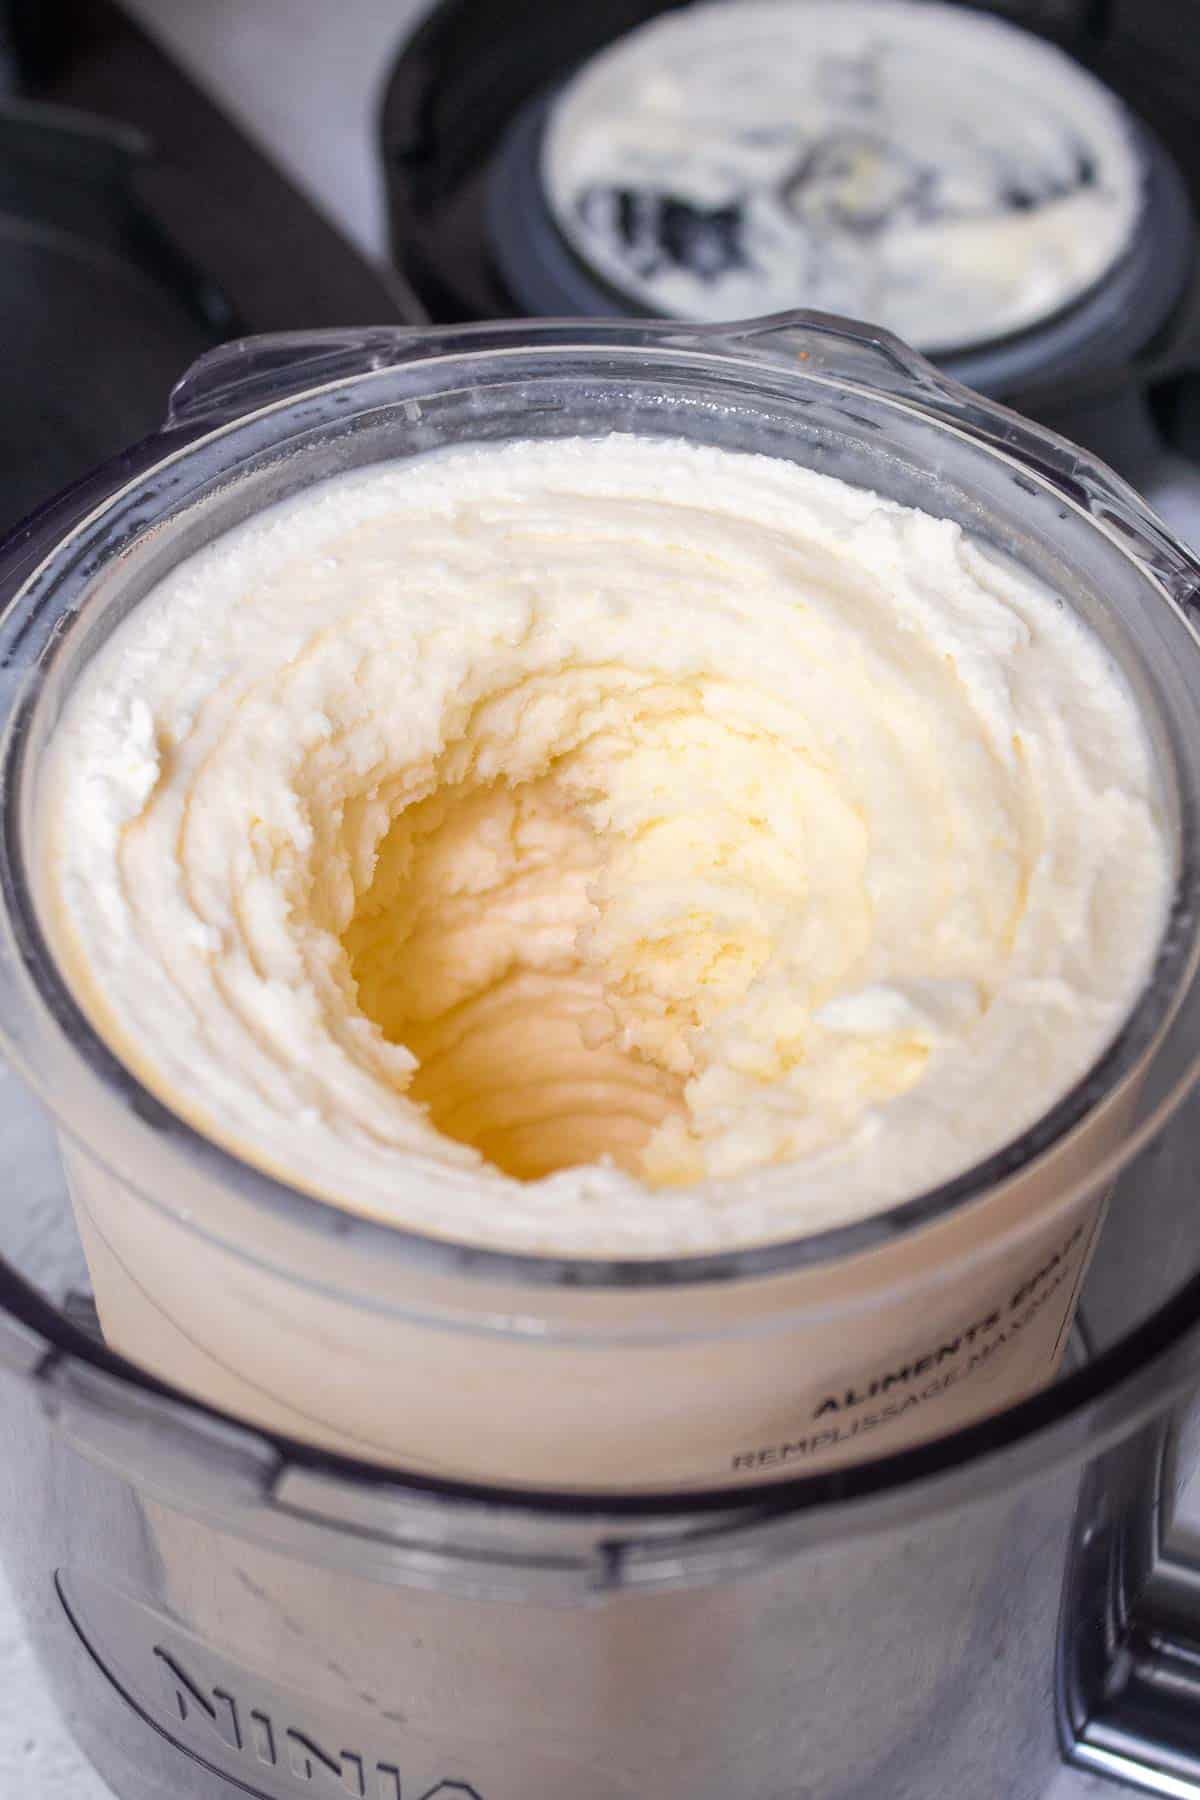 Vanilla protein ice cream is processed and looks smooth in the pint